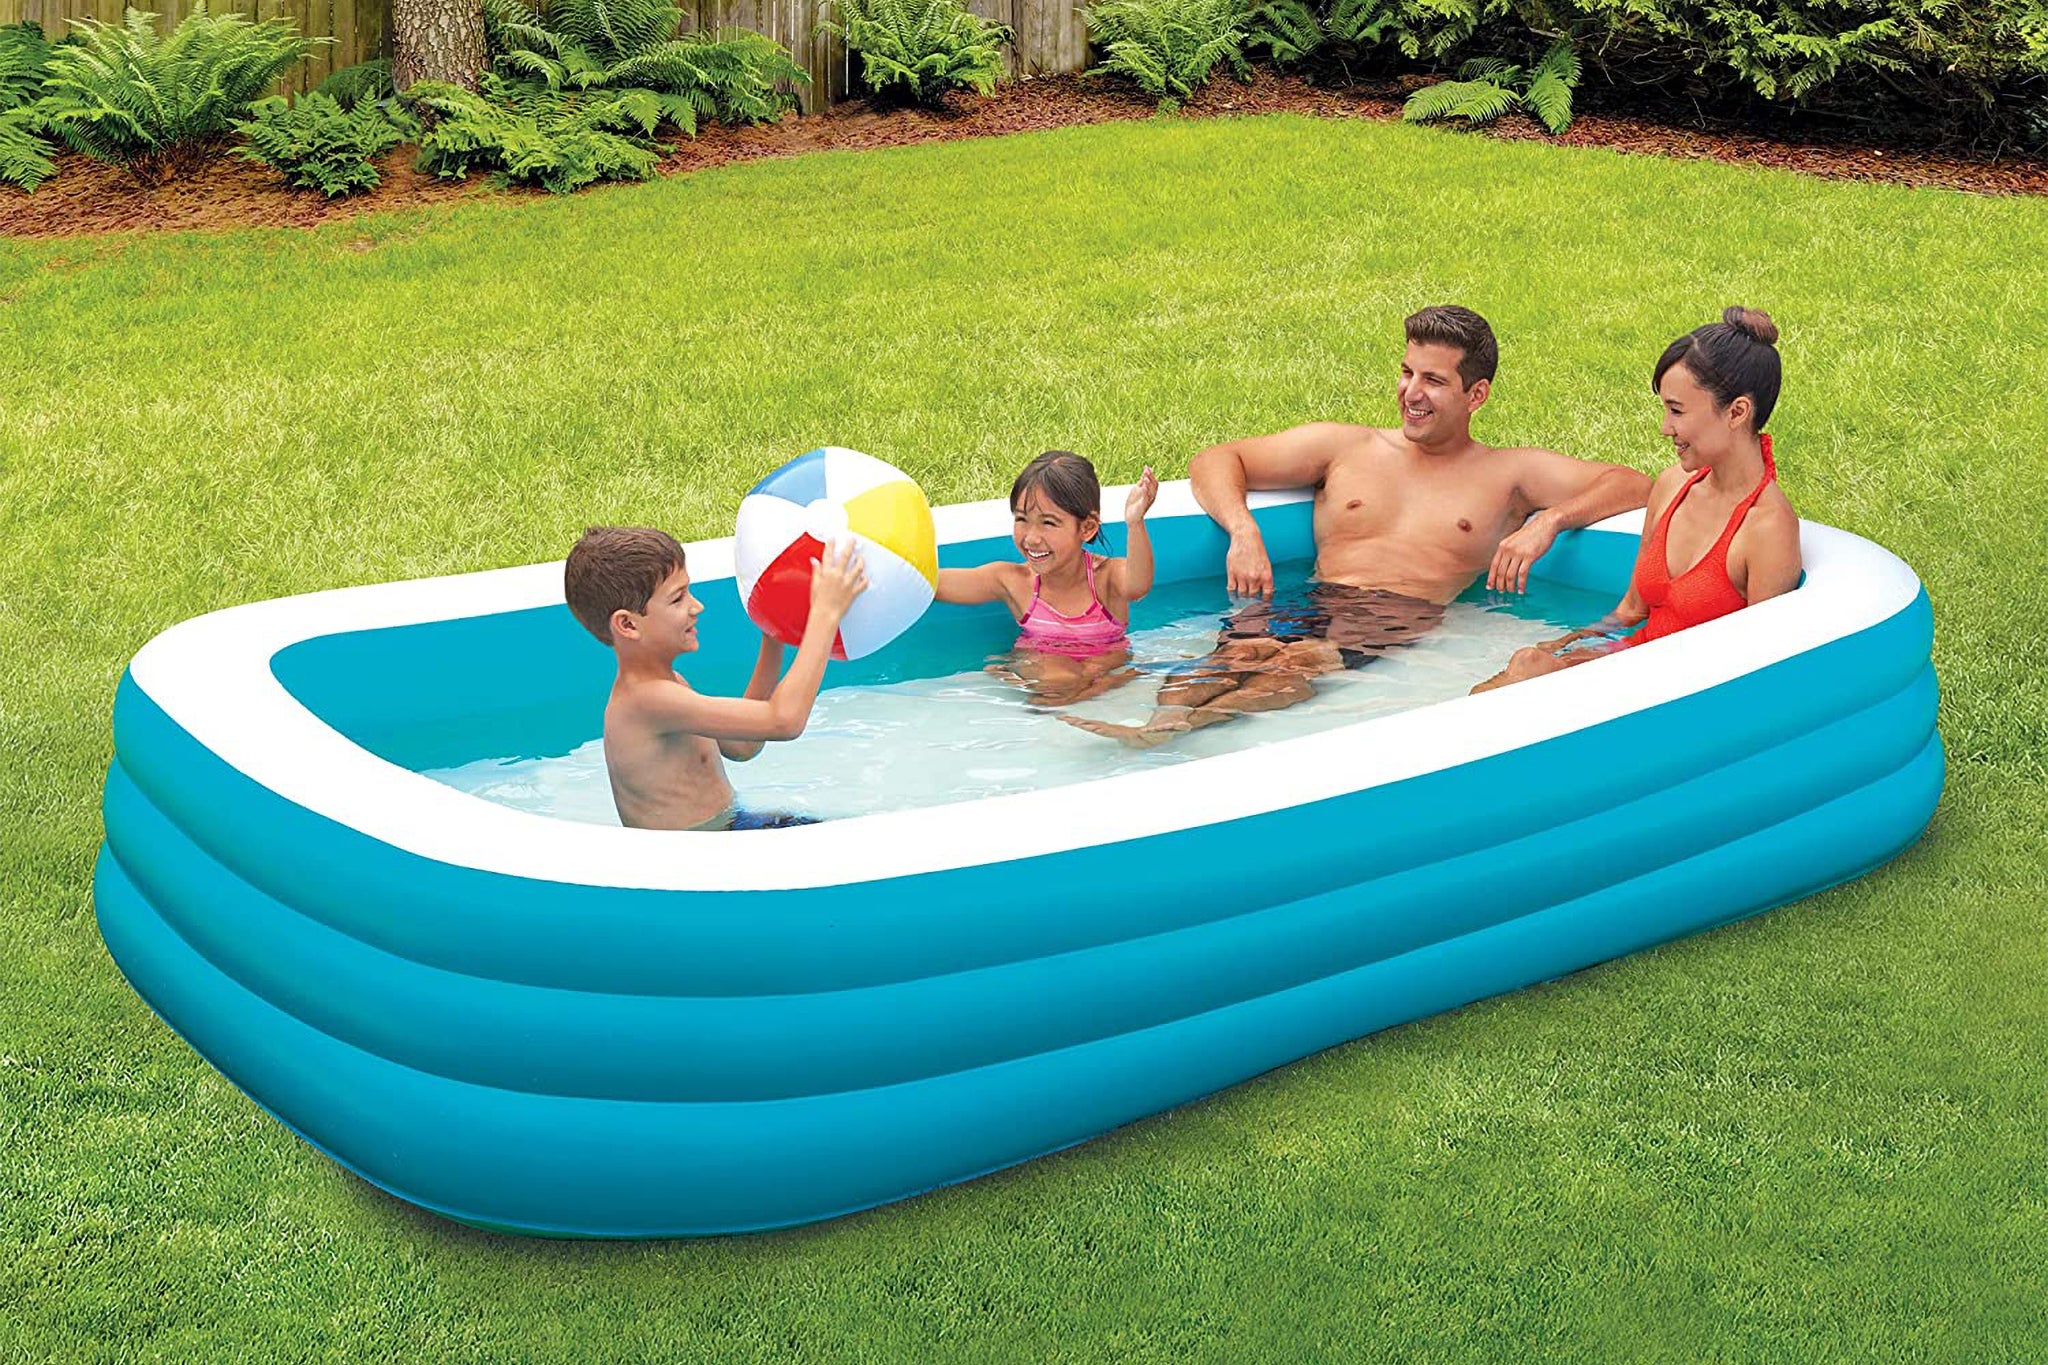 The Rise of DIY Inflatable Pools